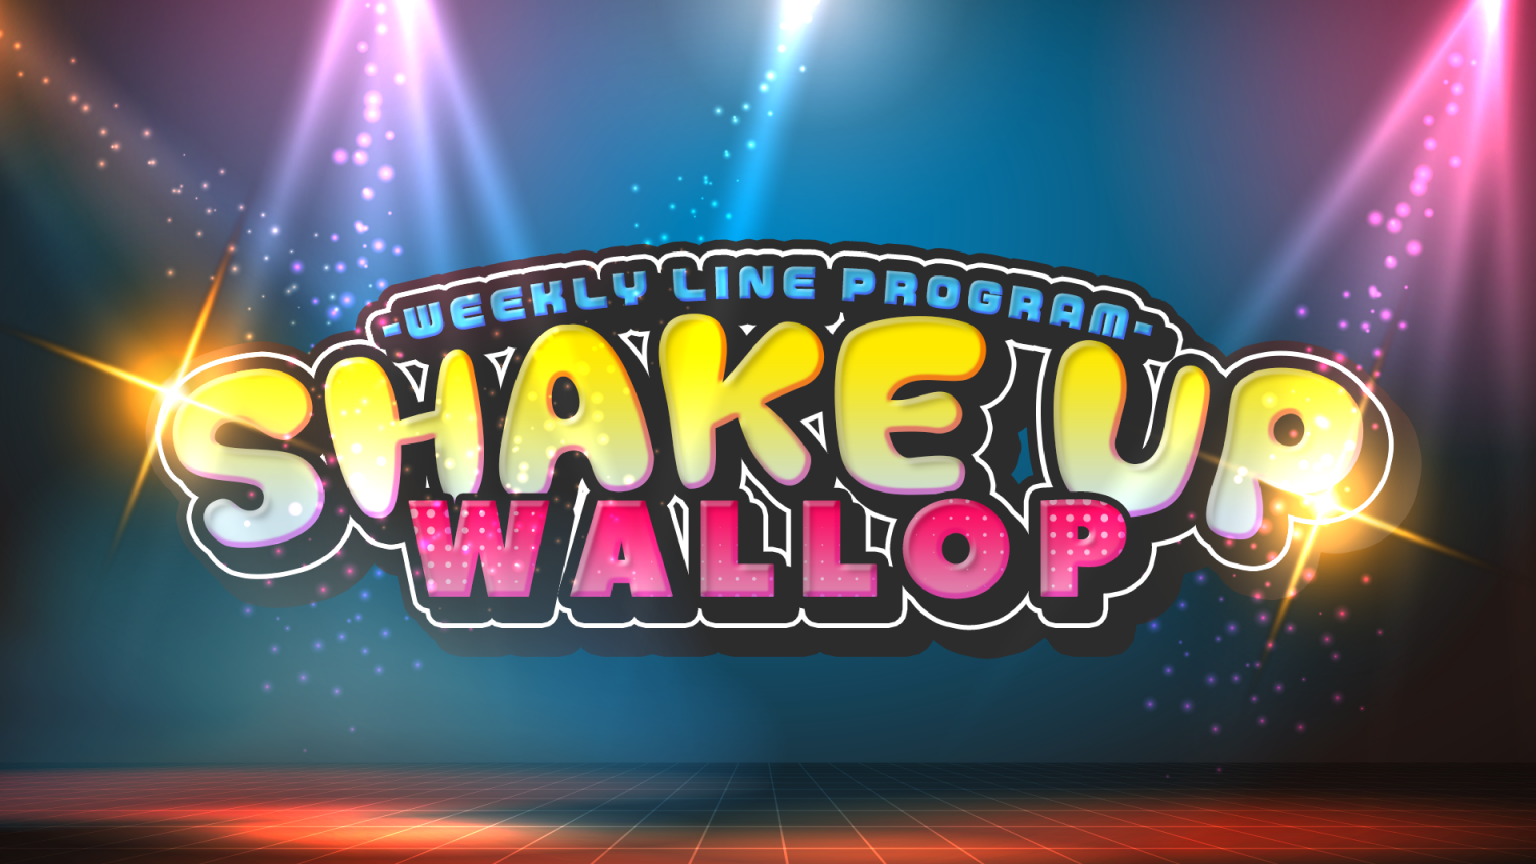 Content_shake-up-wallop-1536x864